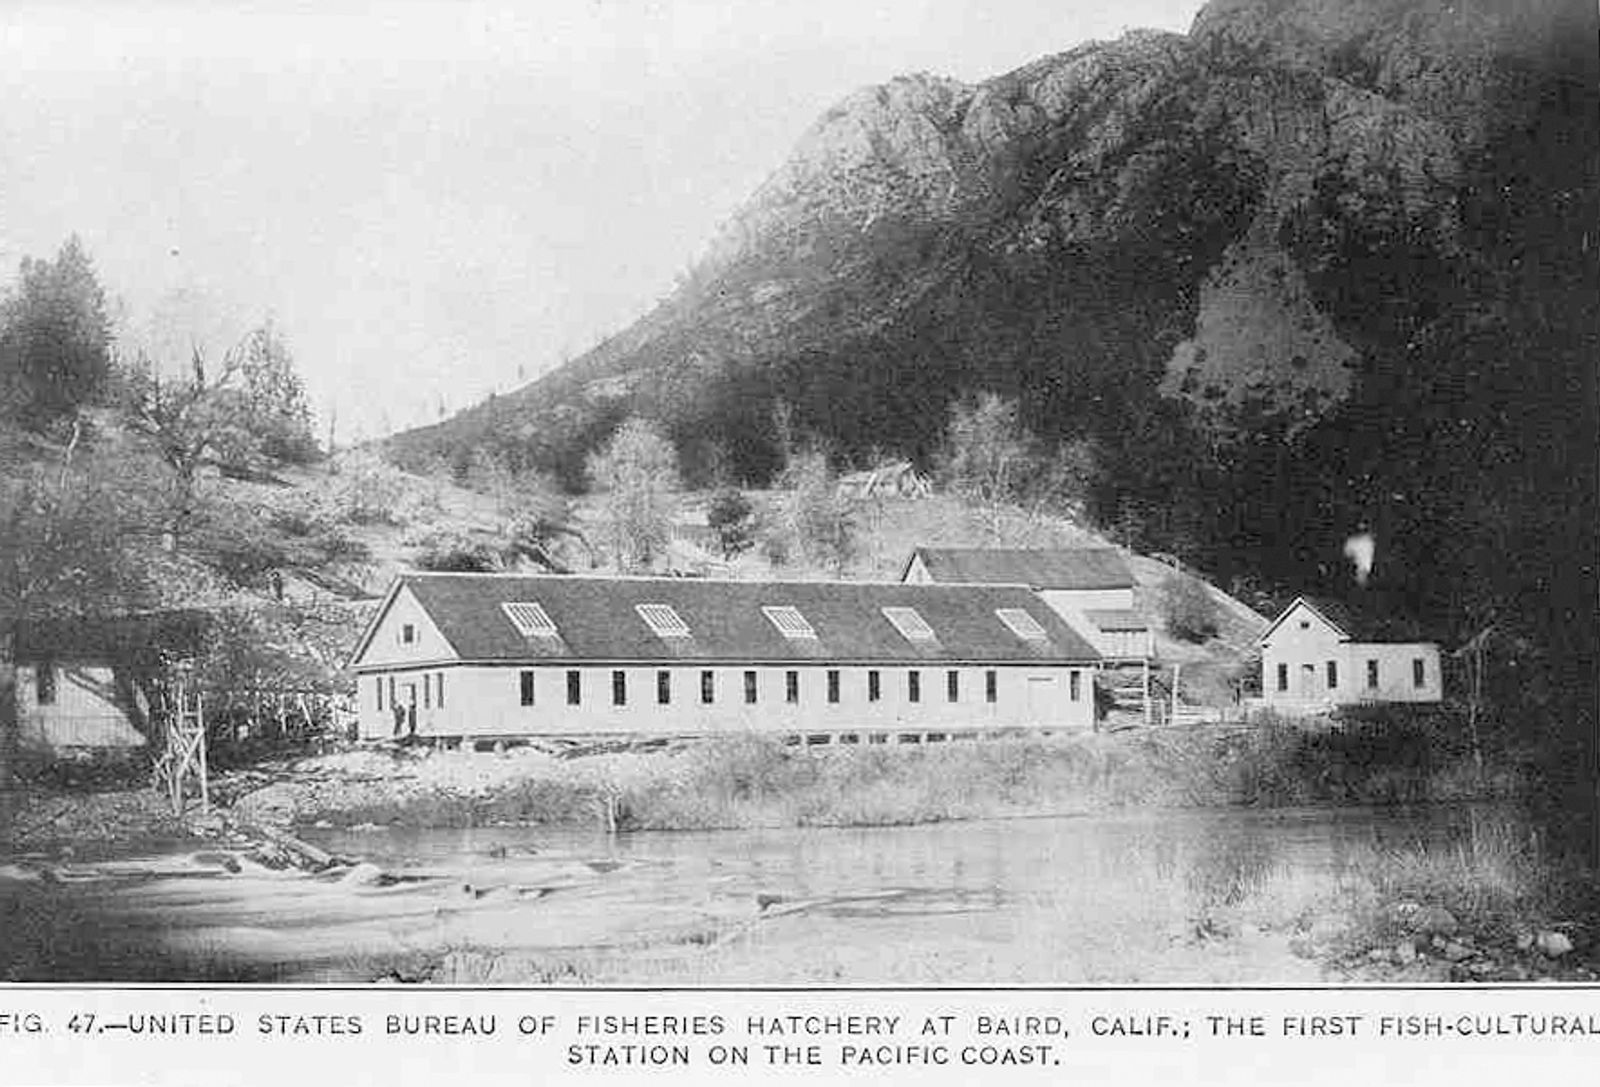 an old black and white image of a long, low-slung building next to a river, with smaller outbuildings on either side.